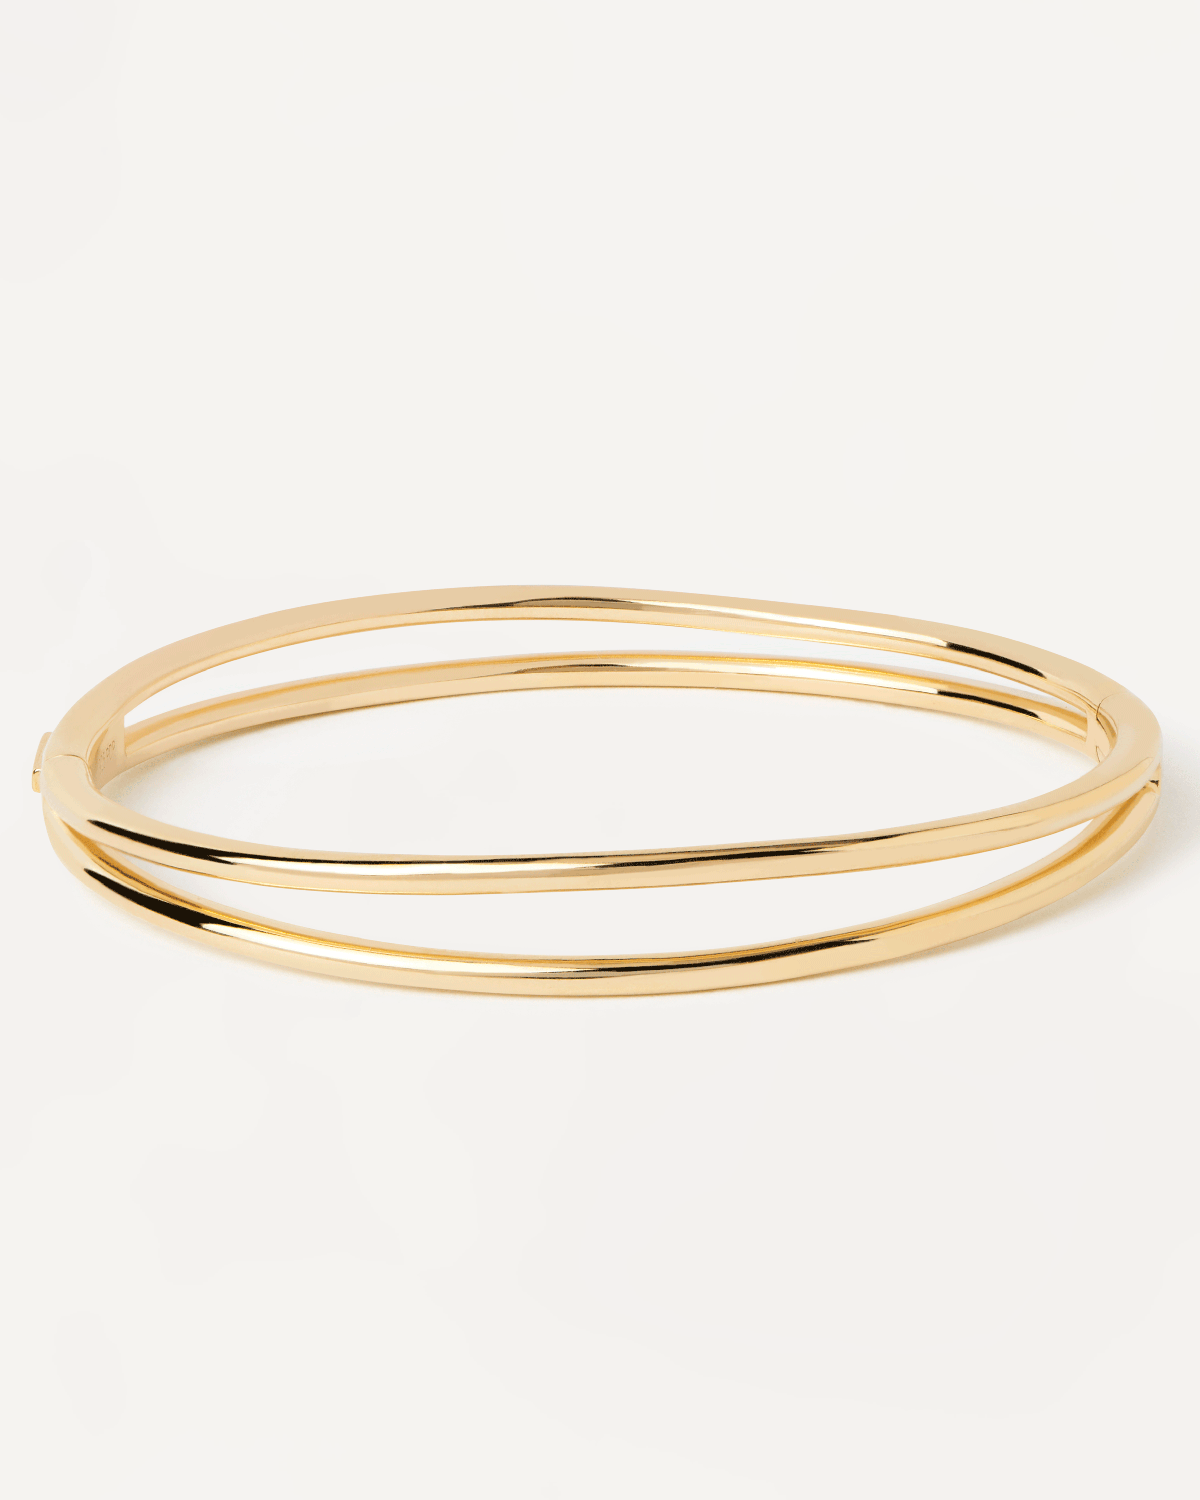 2023 Selection | Twister Bangle. Hinged rigid bracelet with two bands in gold-plated silver. Get the latest arrival from PDPAOLA. Place your order safely and get this Best Seller. Free Shipping.